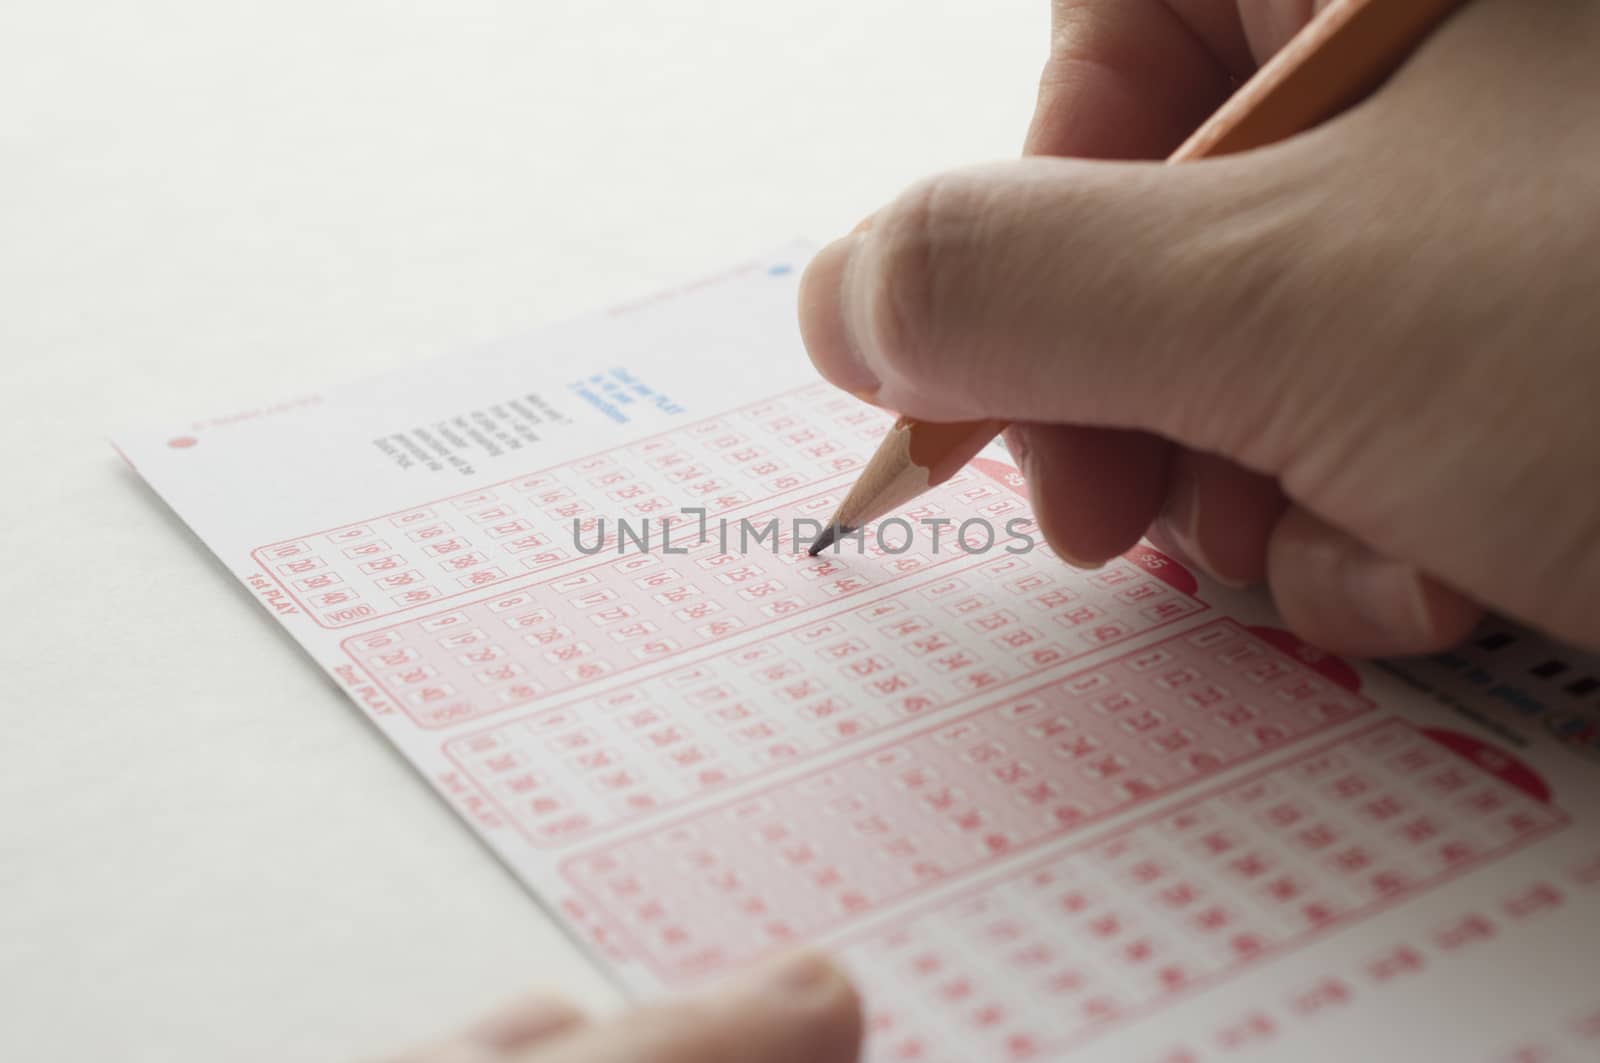 Close-up of a person marking number on lottery ticket with pen